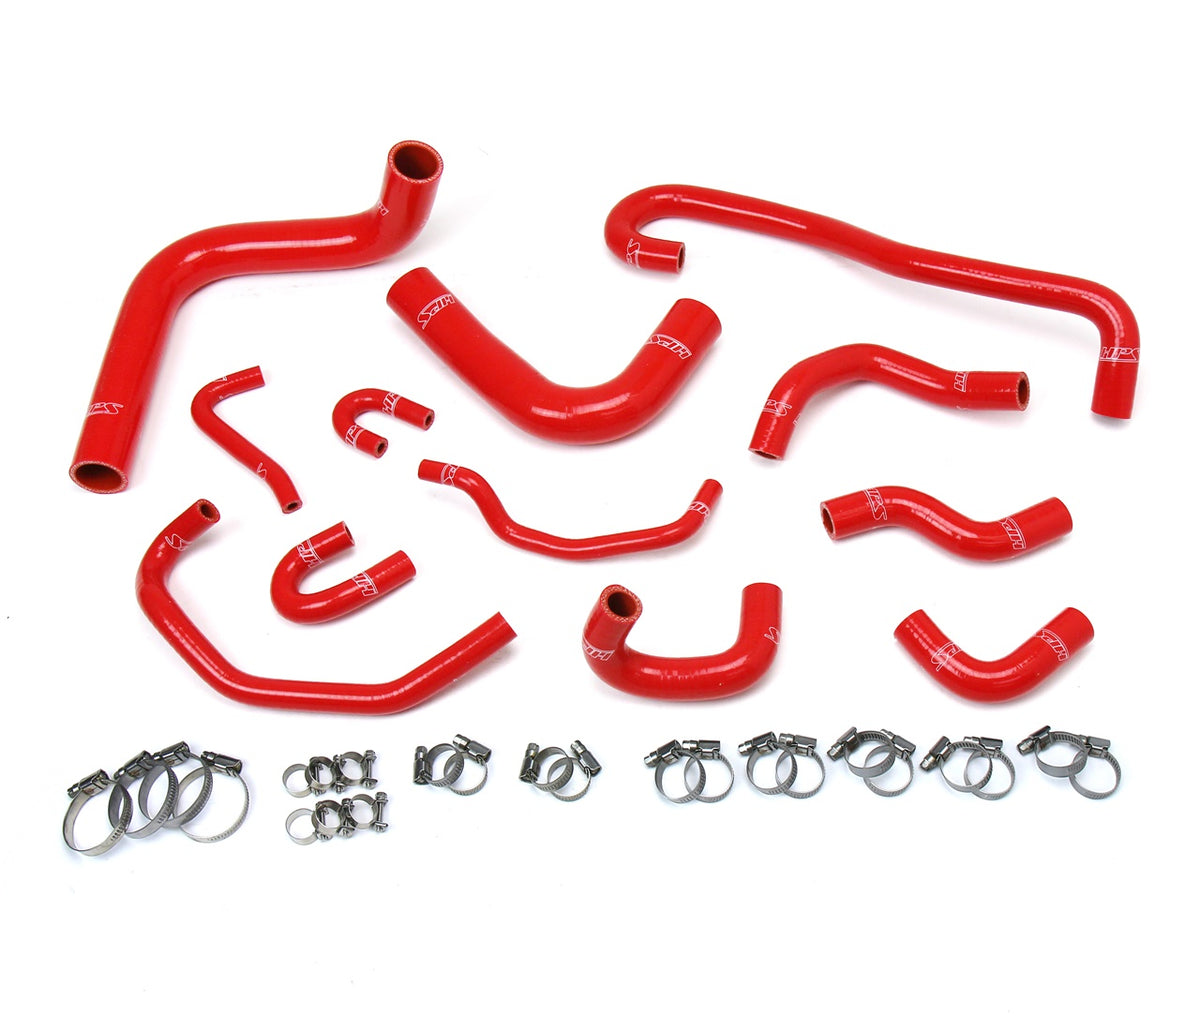 HPS Reinforced Red Silicone Radiator + Heater Hose Kit Coolant Toyota 89-92 Pickup 3.0L V6 57-1656-RED